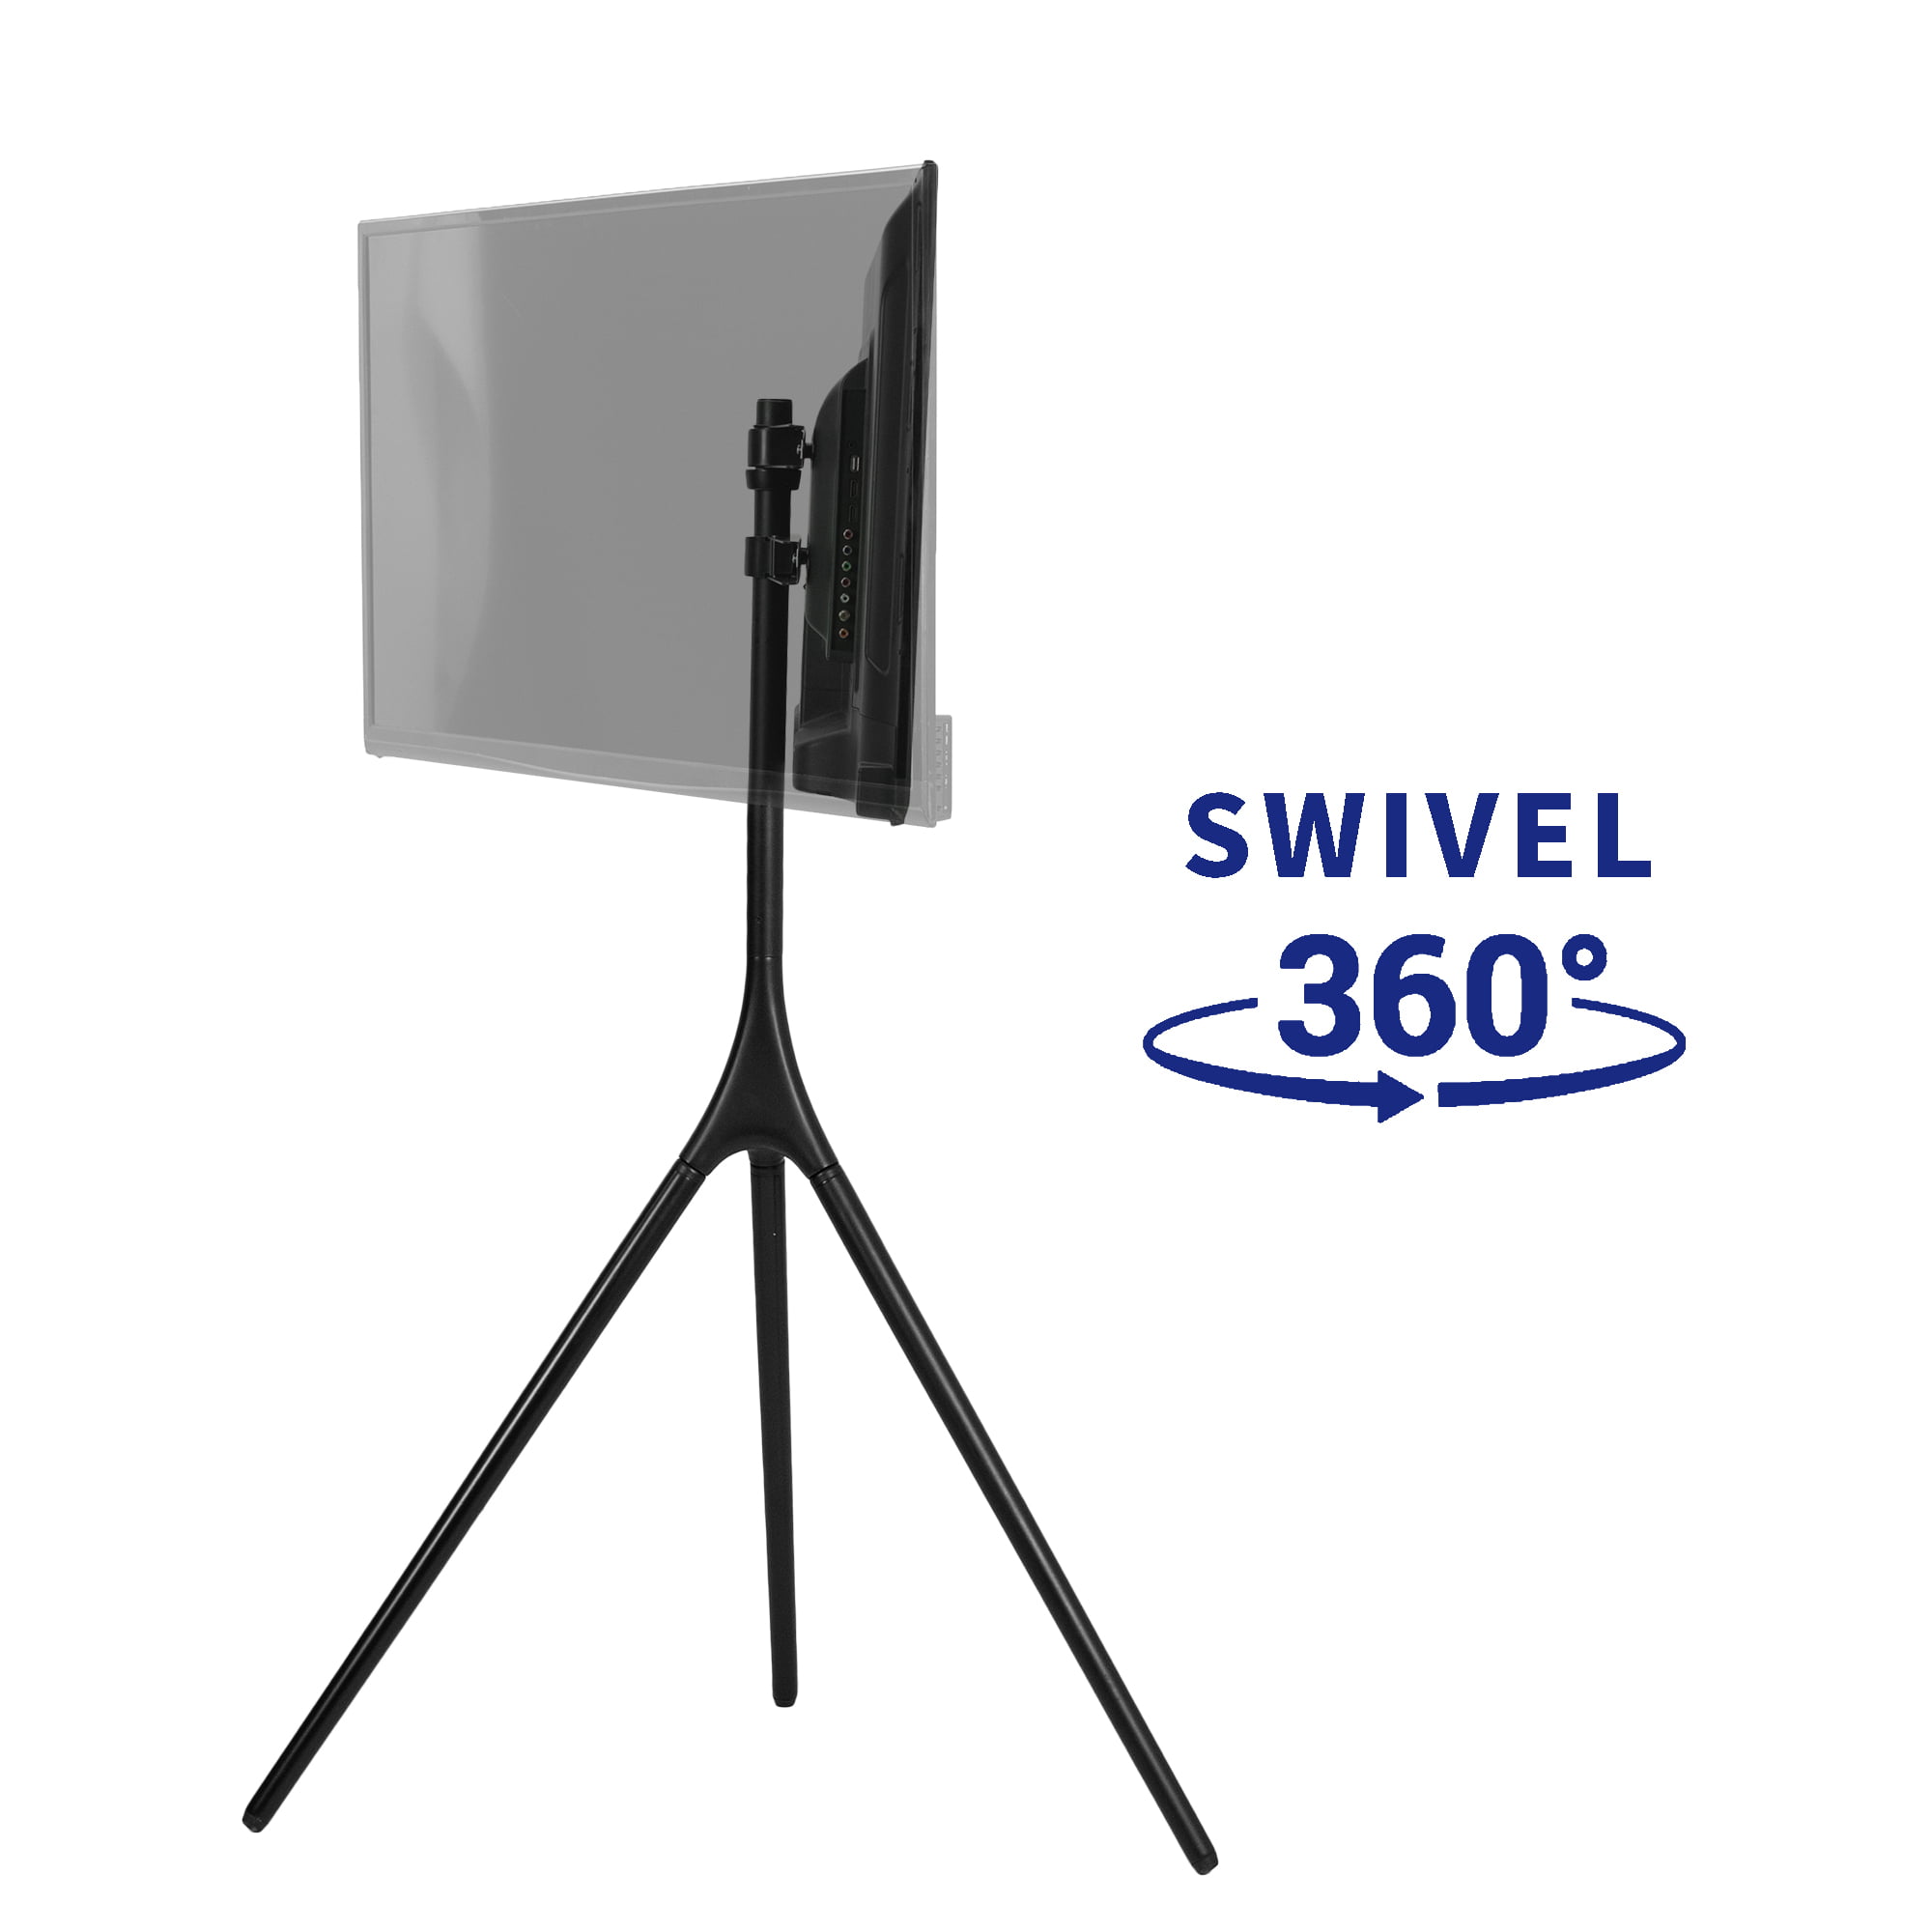 Efavormart 65 inch Black Metal Easel Stand - Collapsible Tripod Stand - Perfect for Wedding Ceremonies, Party Decorations, Banquet, Upscale Occasions